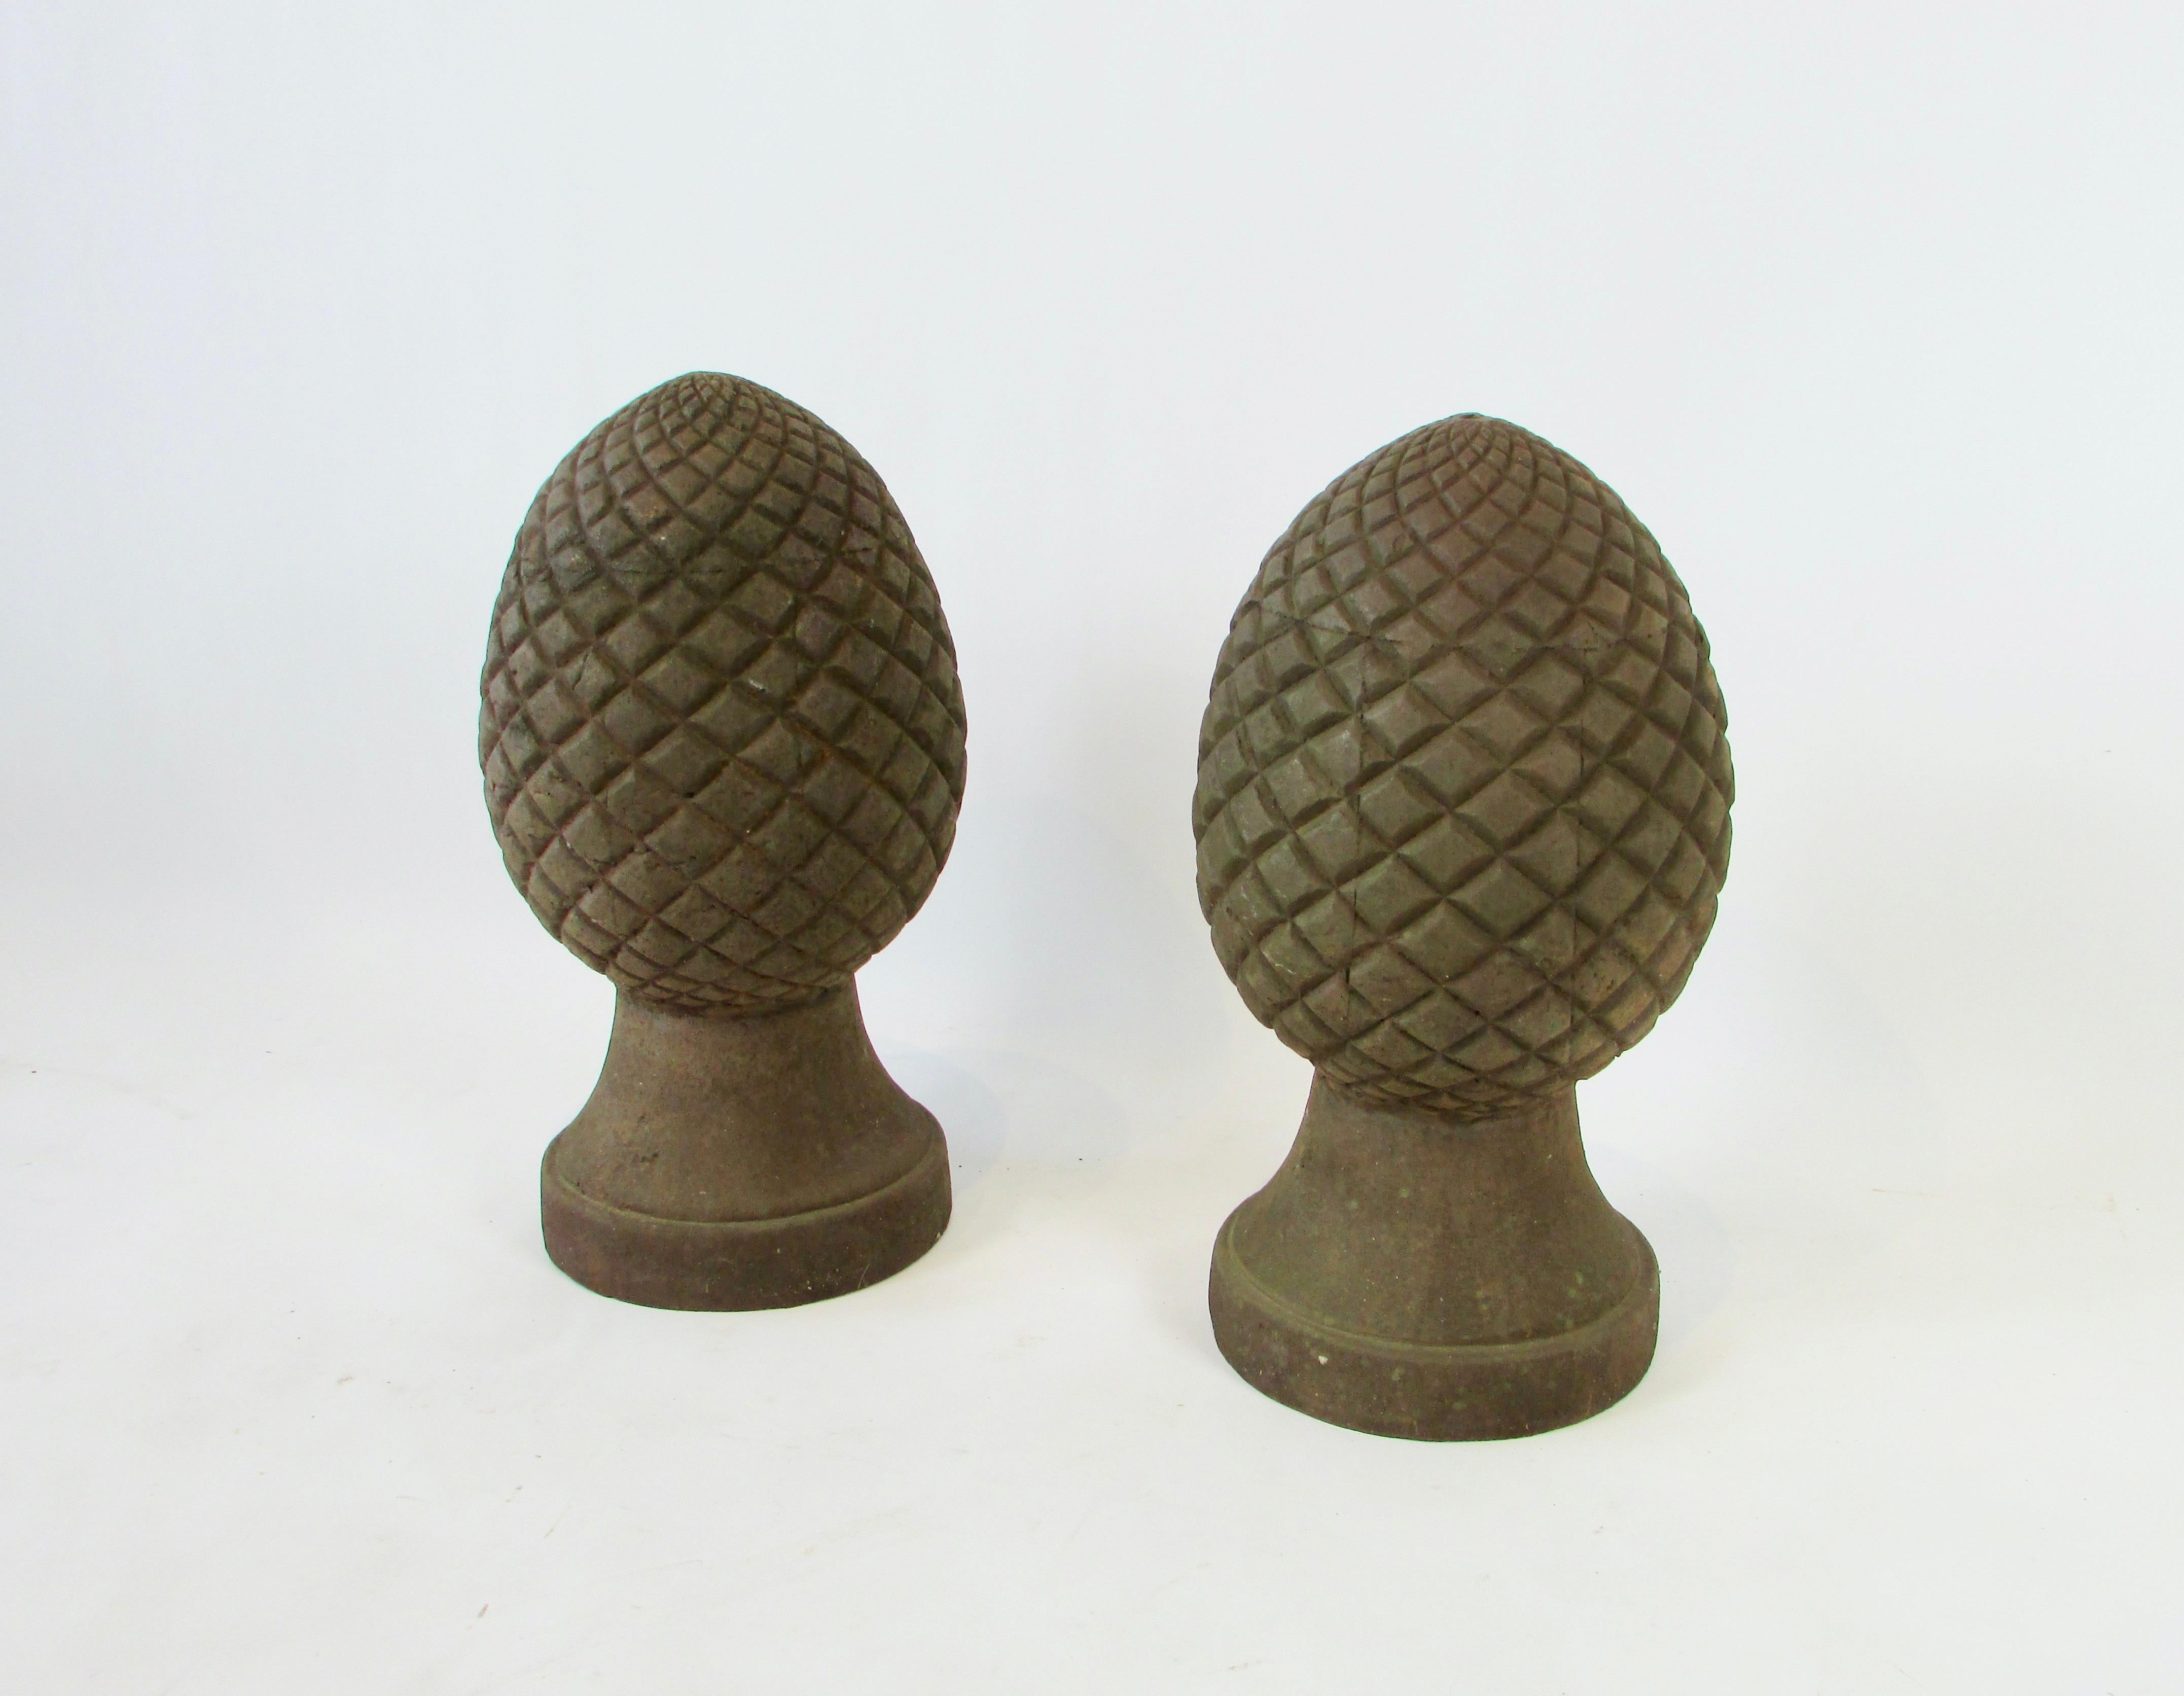 Pair of large (and heavy) cast iron finials for garden or home decoration. 19th century manufacture but have a certain modernist style.